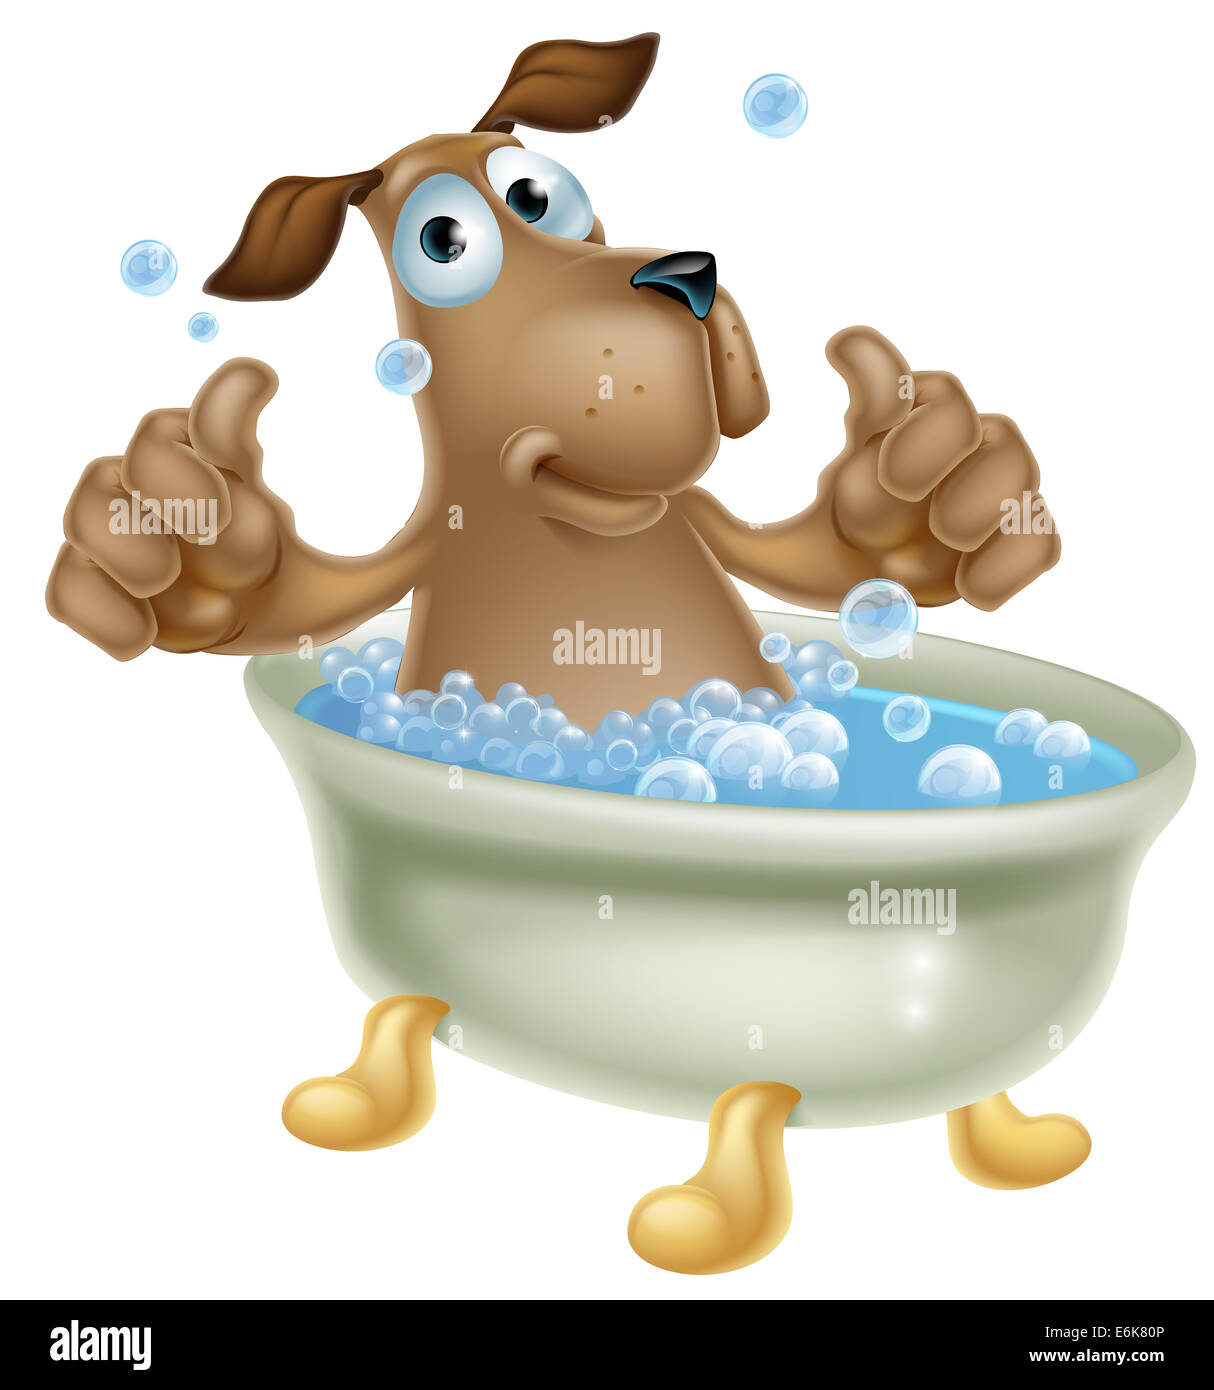 An illustration of a cute cartoon dog mascot character having a bath with lots of bubbles and doing a double thumbs up Stock Photo